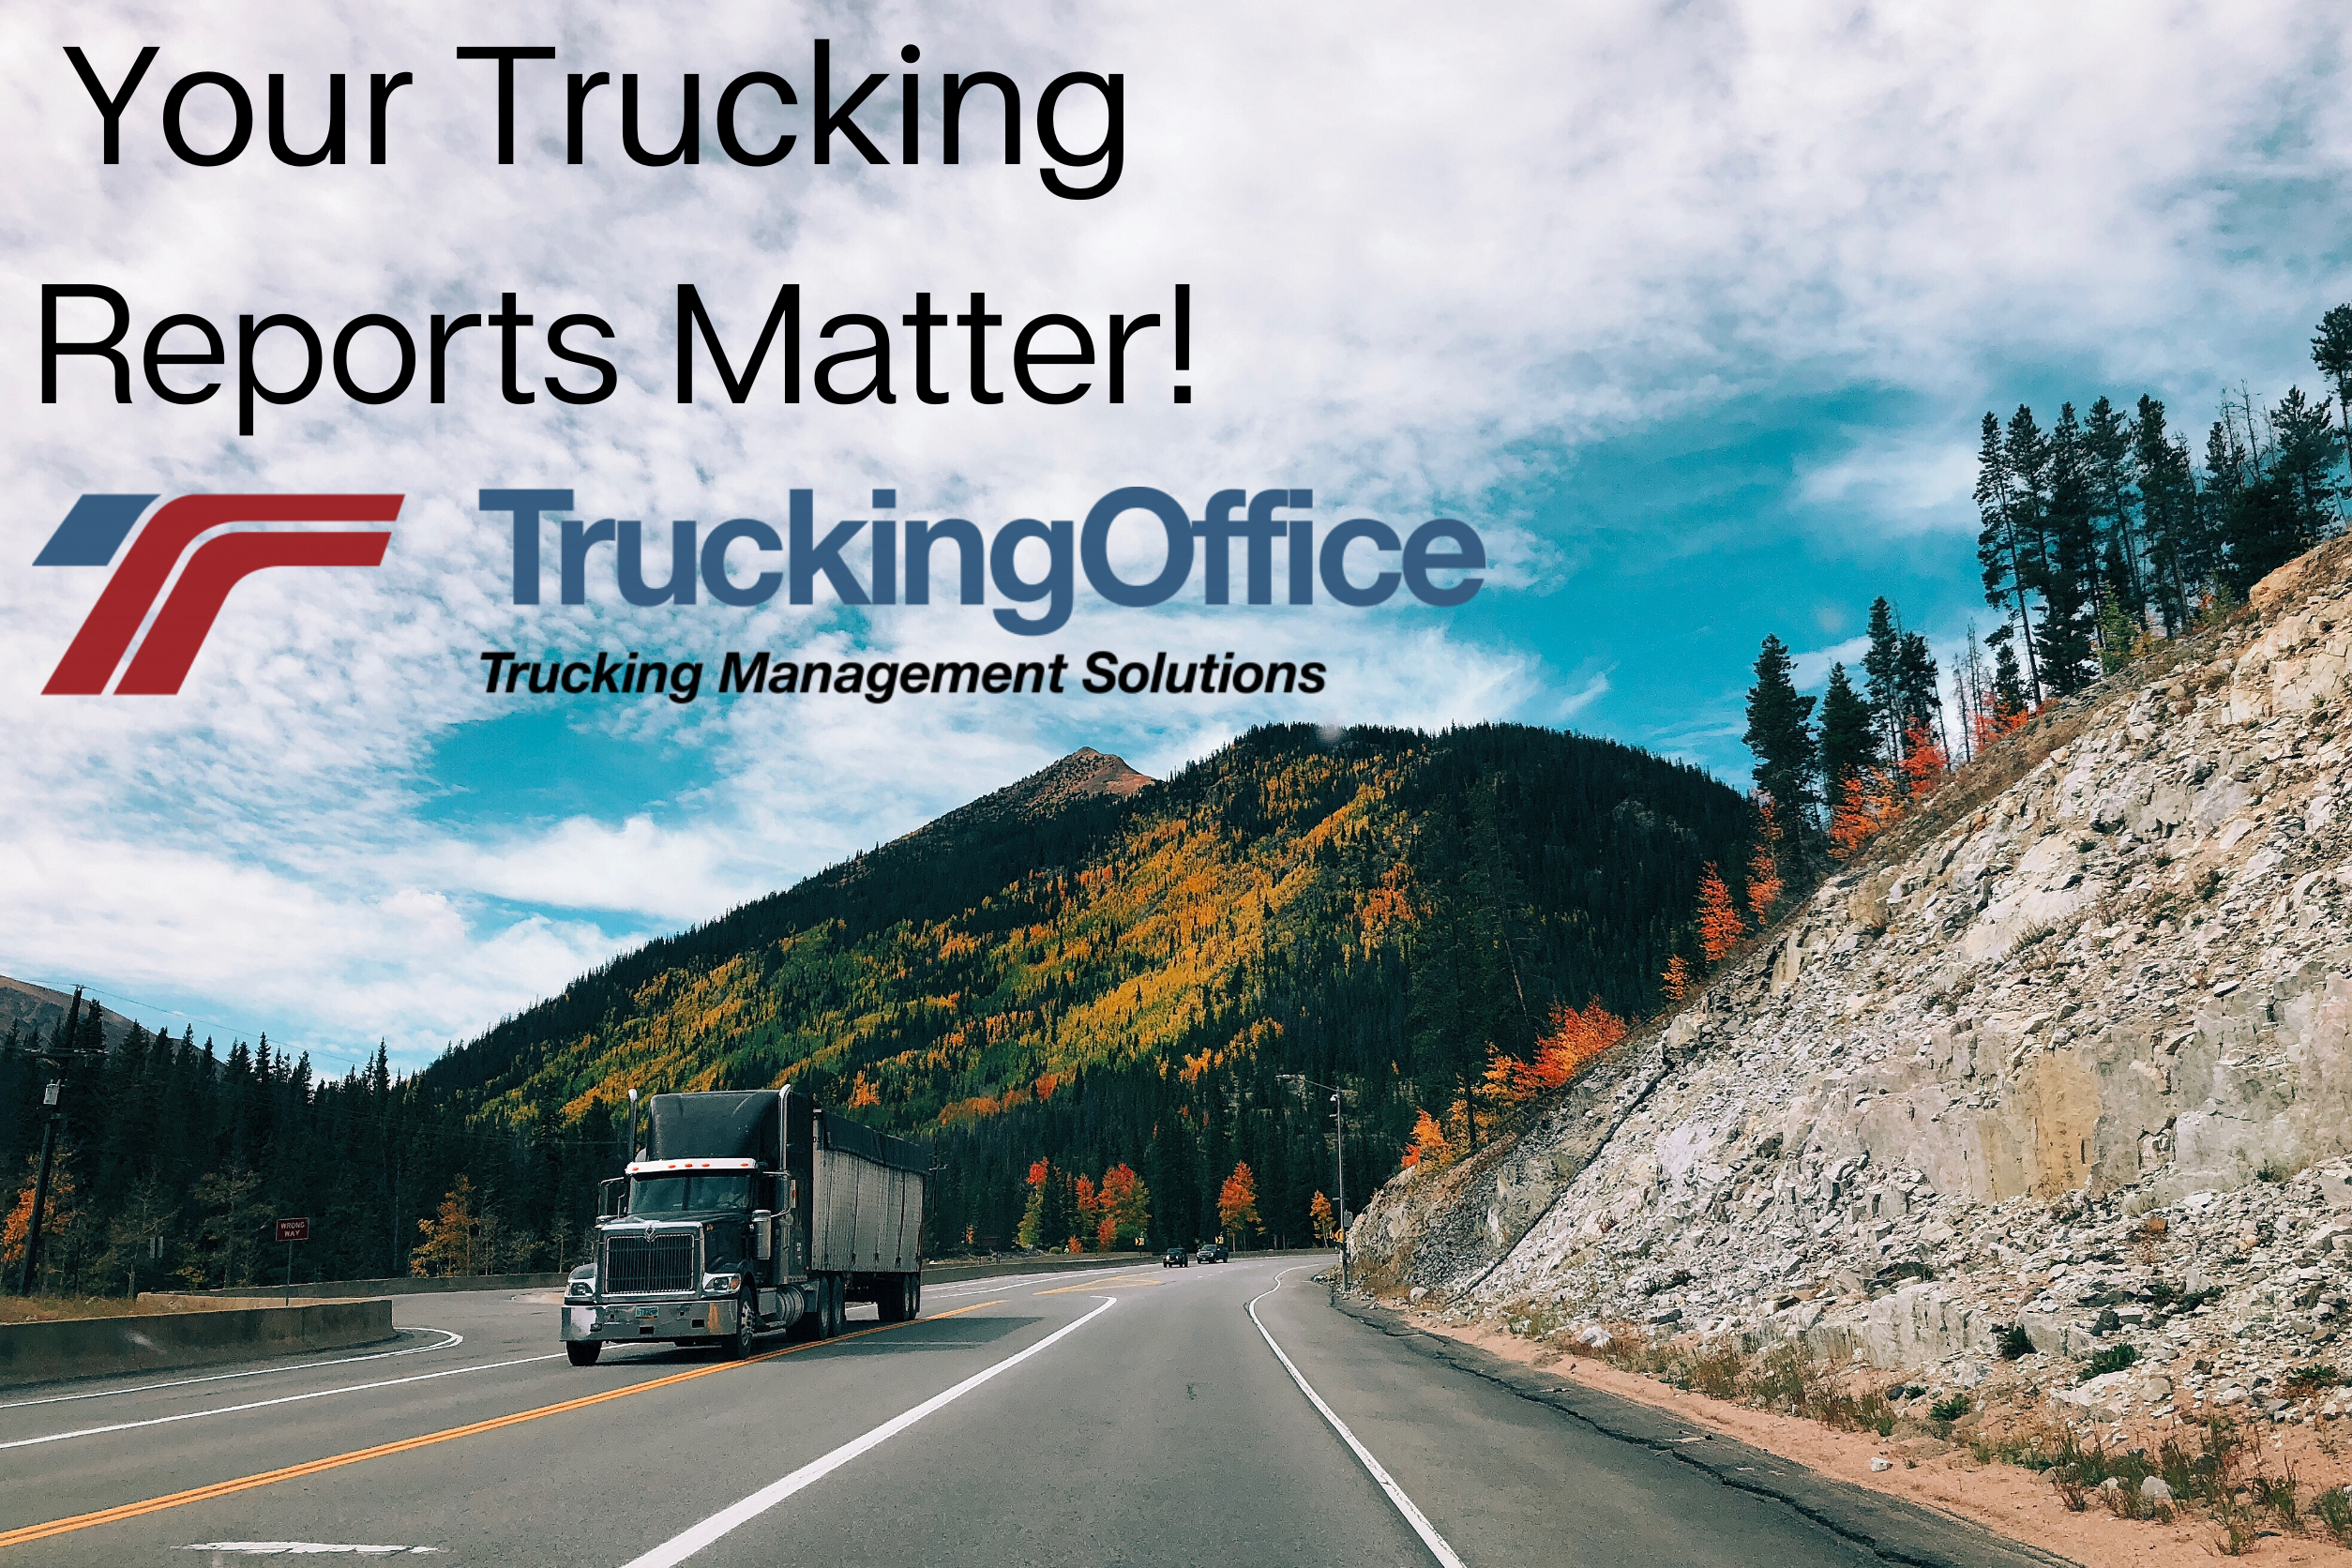 Is Trucking a Numbers Game? Why Your Trucking Reports Matter